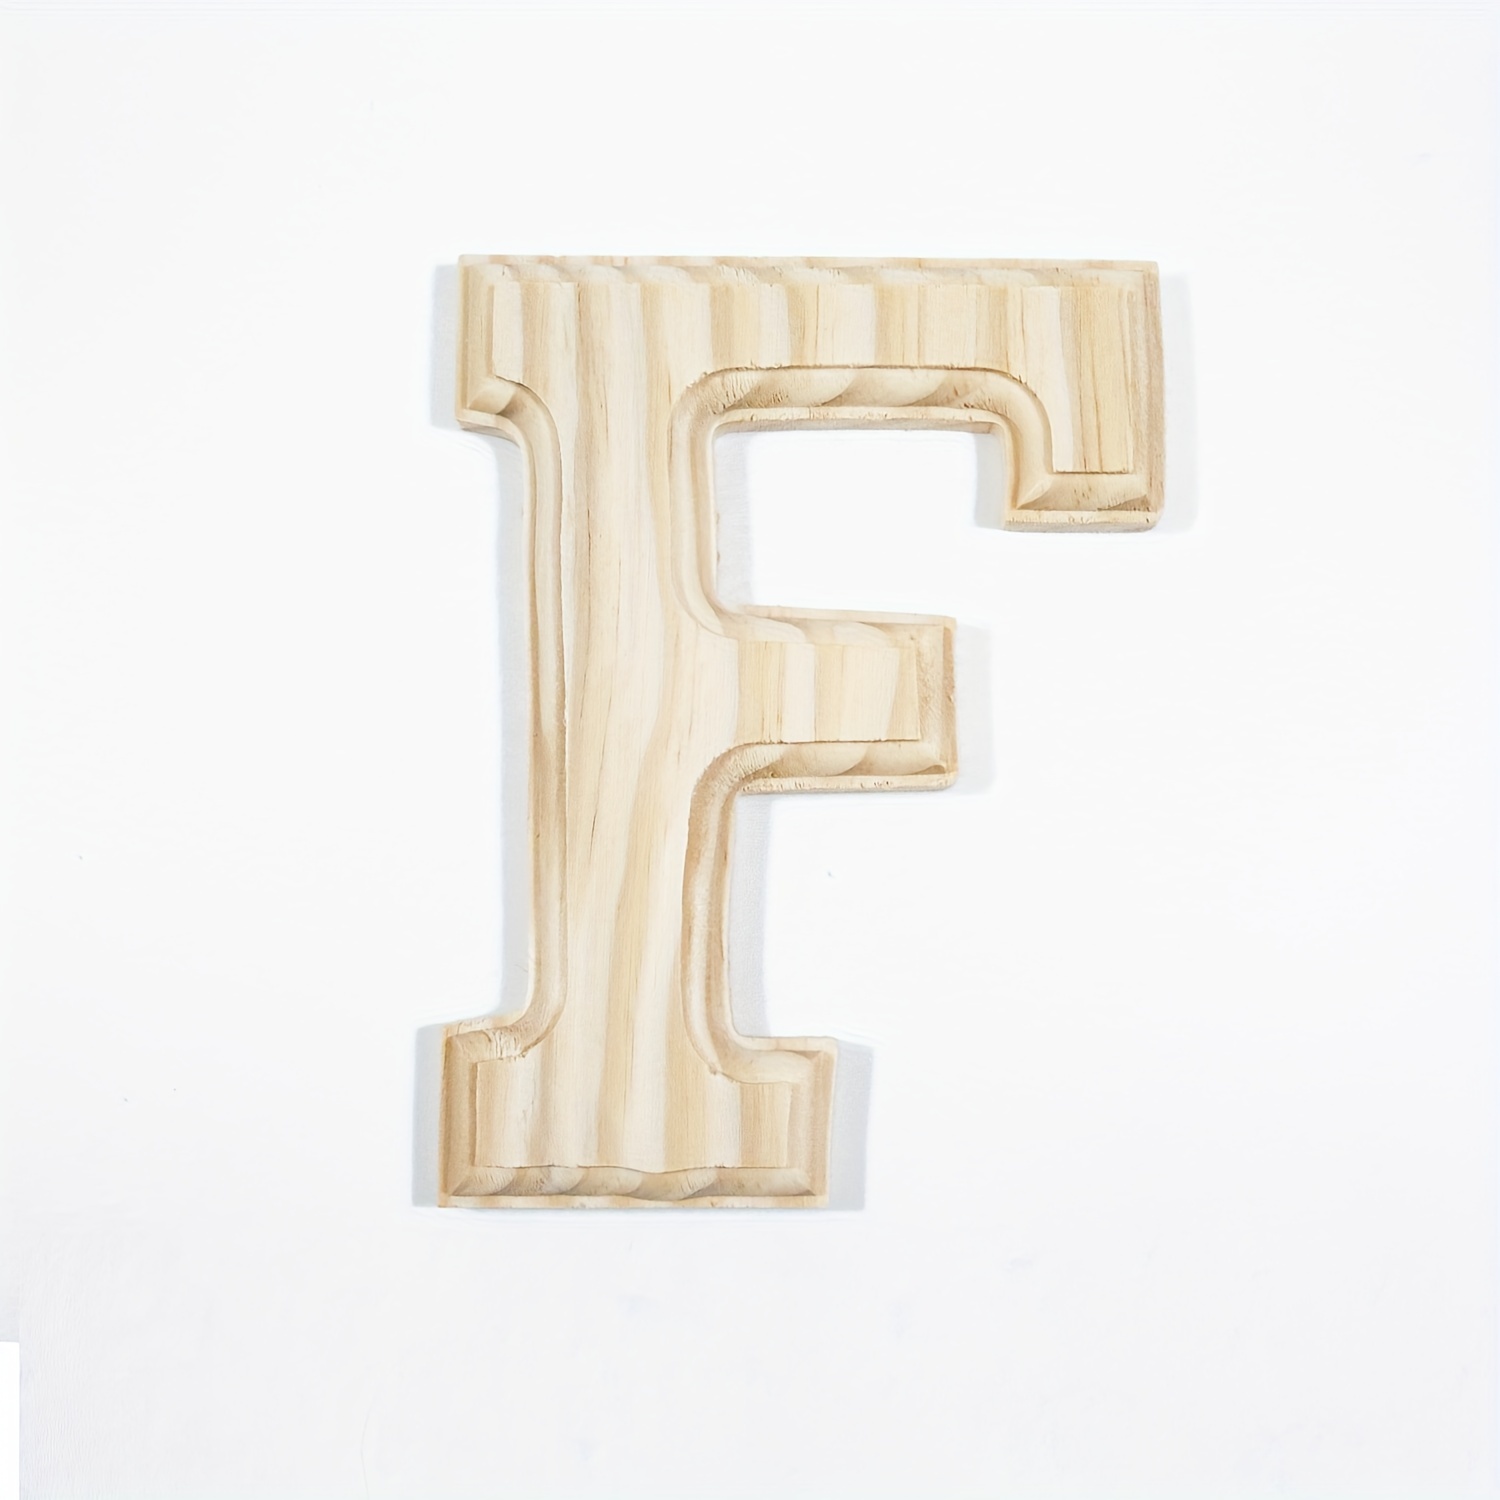 White Wood Letters 6 Inch, Wood Letters for DIY, Party Projects (F)